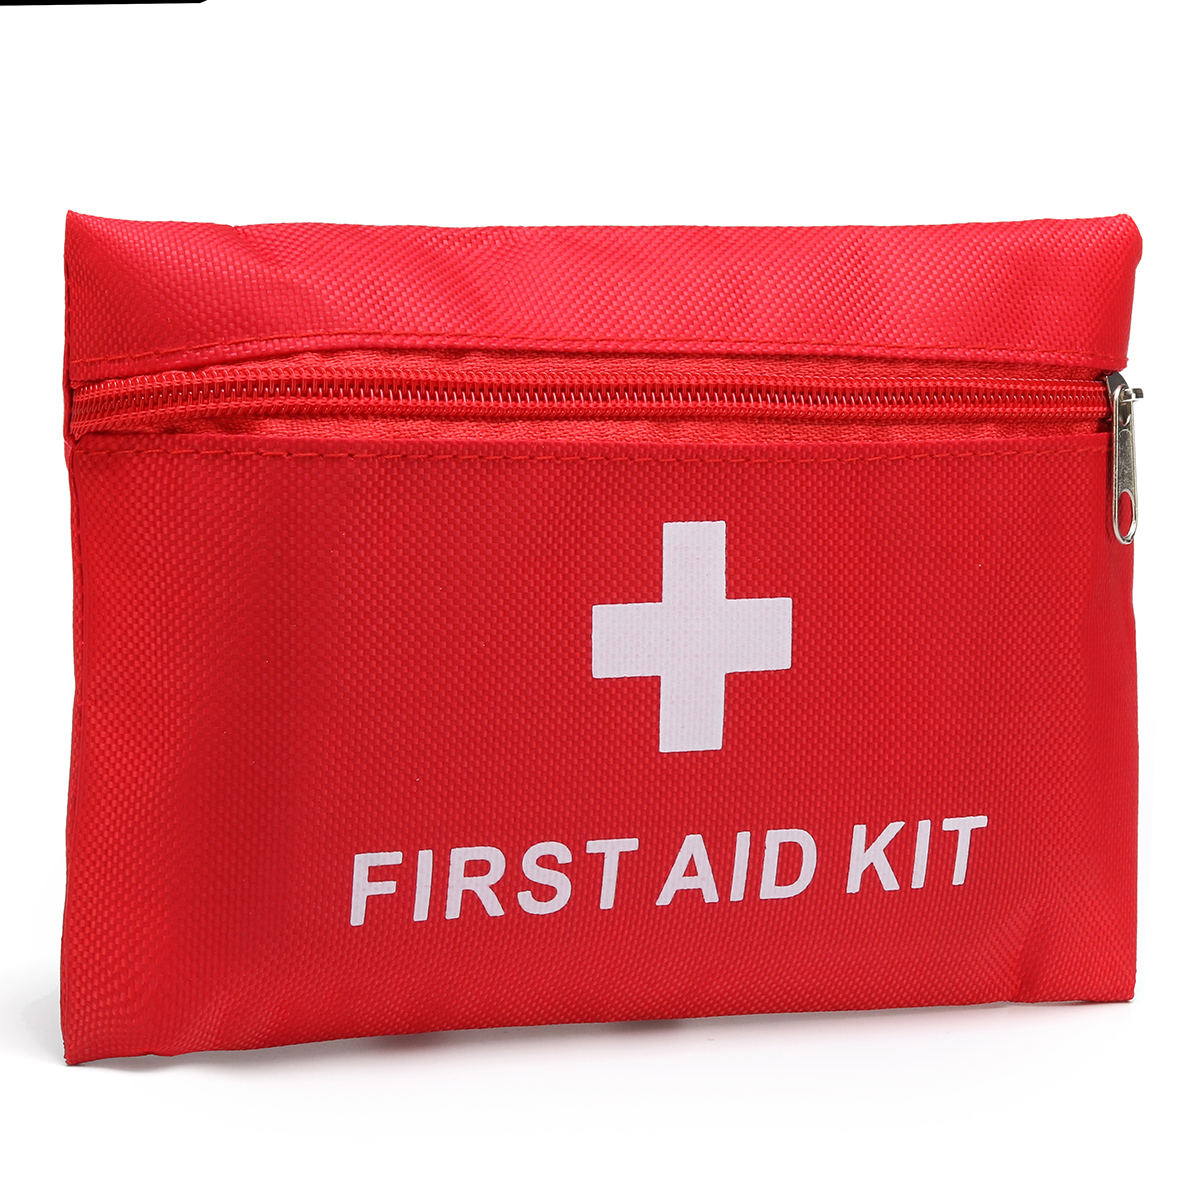 Emergency-First-Aid-Kit-79-Piece-Survival-Supplies-Bag-for-Car-Travel-Home-Emergency-Box-1420491-6